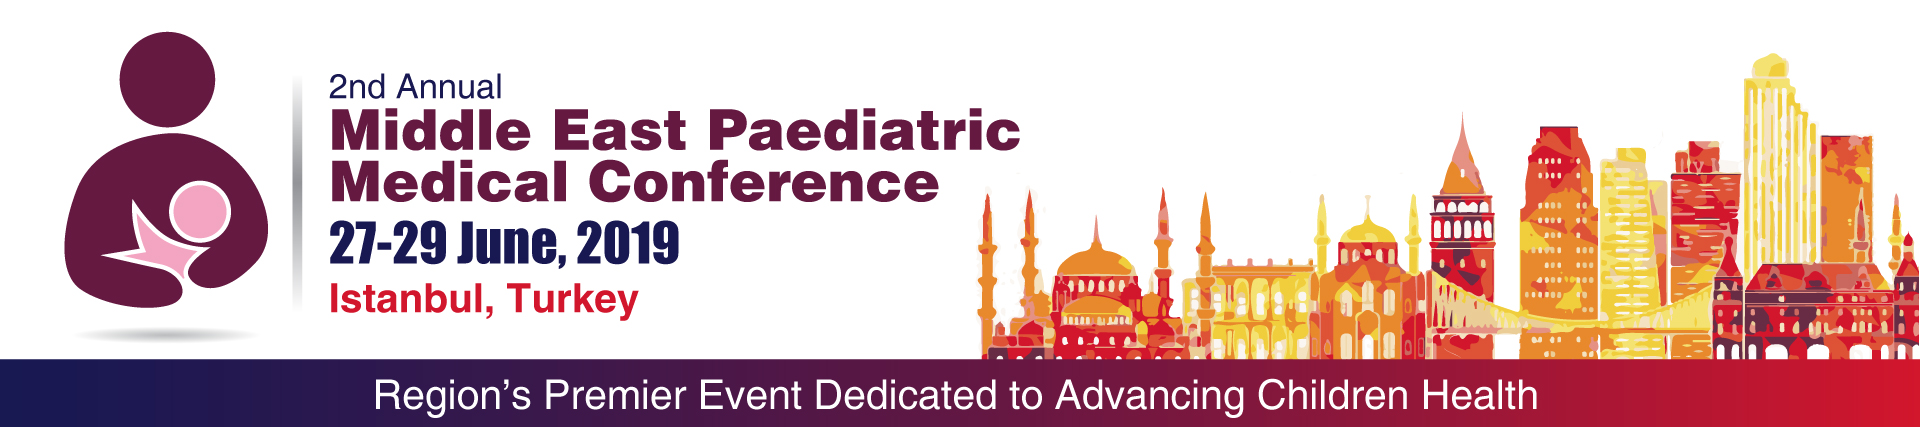 The2ndAnnual Middle East Paediatric Medical Conference, Istanbul, İstanbul, Turkey